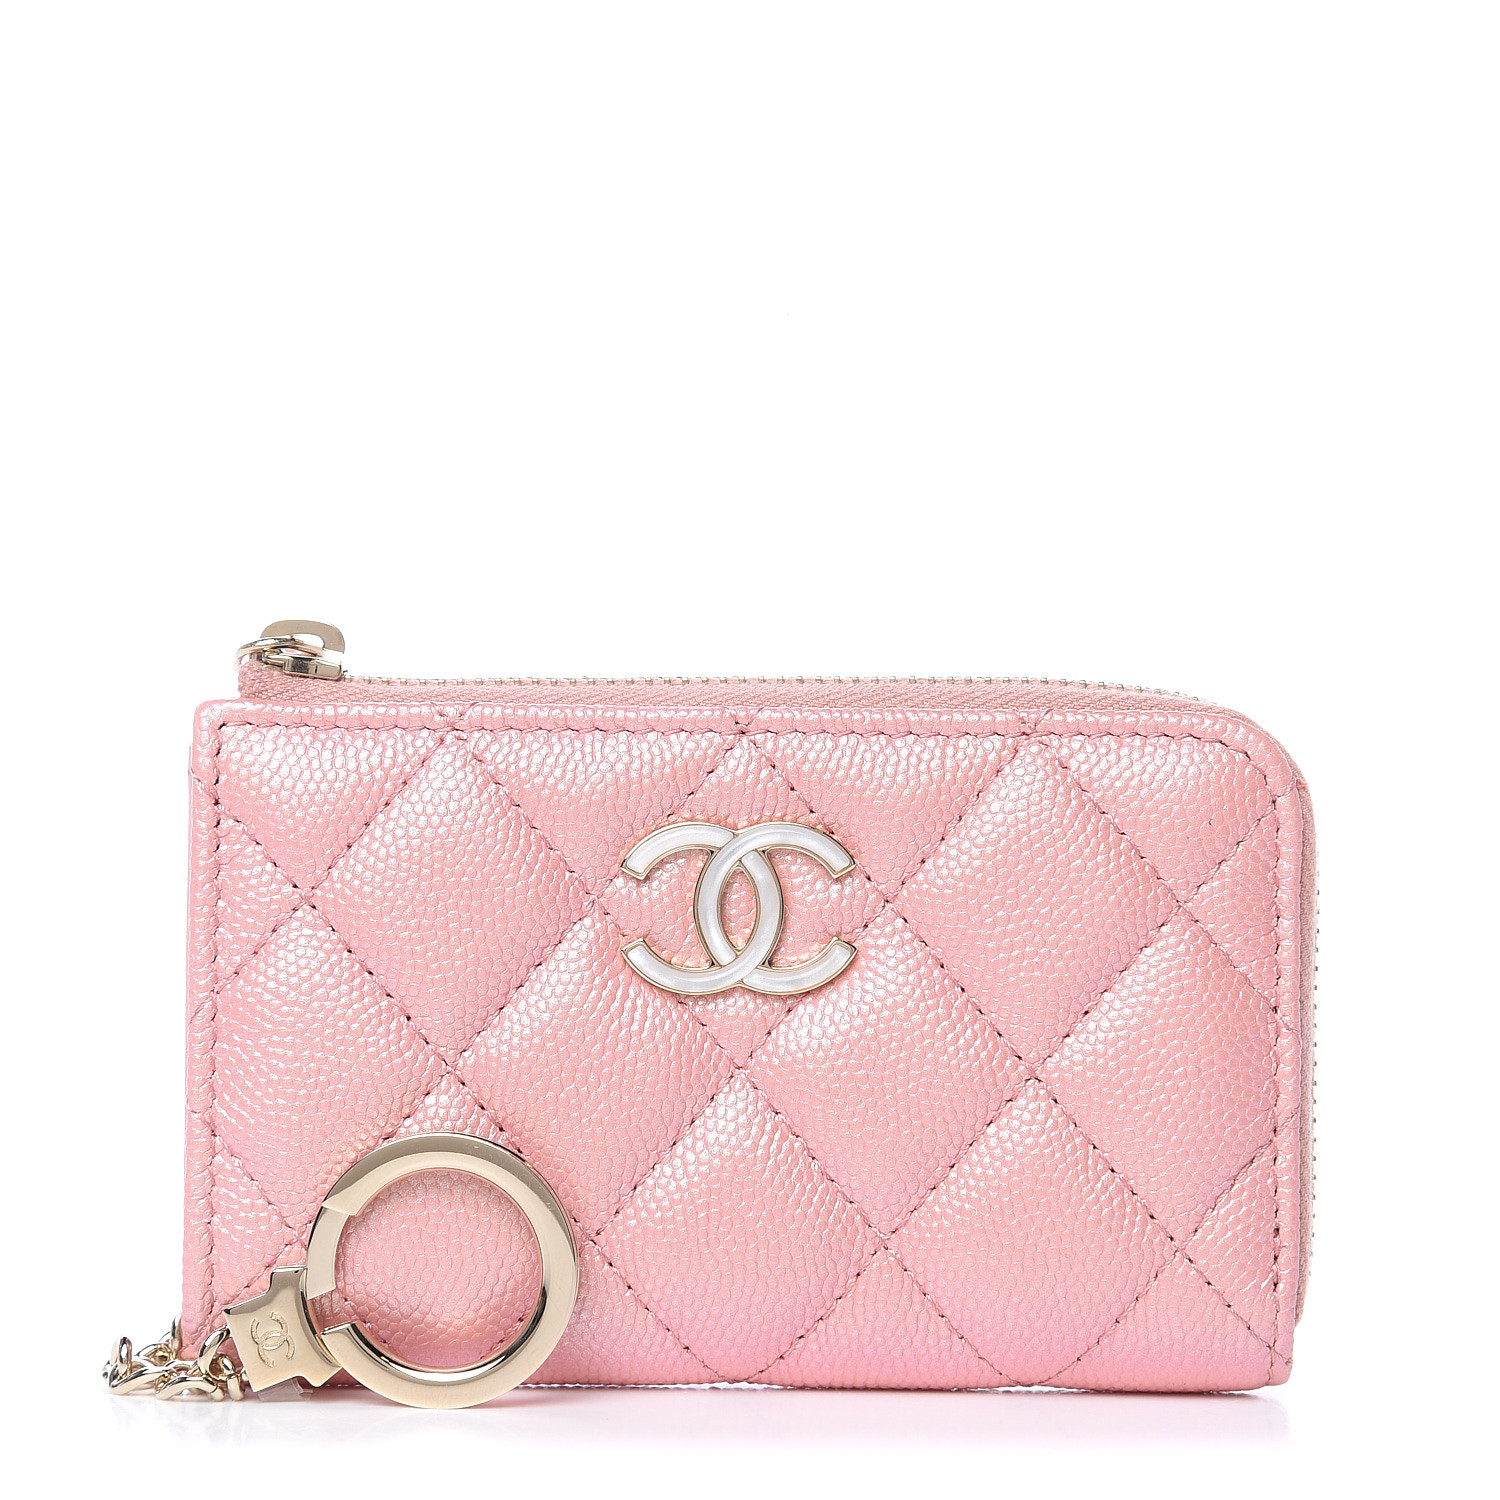 CHANEL Iridescent Caviar Quilted Zipped Key Holder Case Rose Pink ...